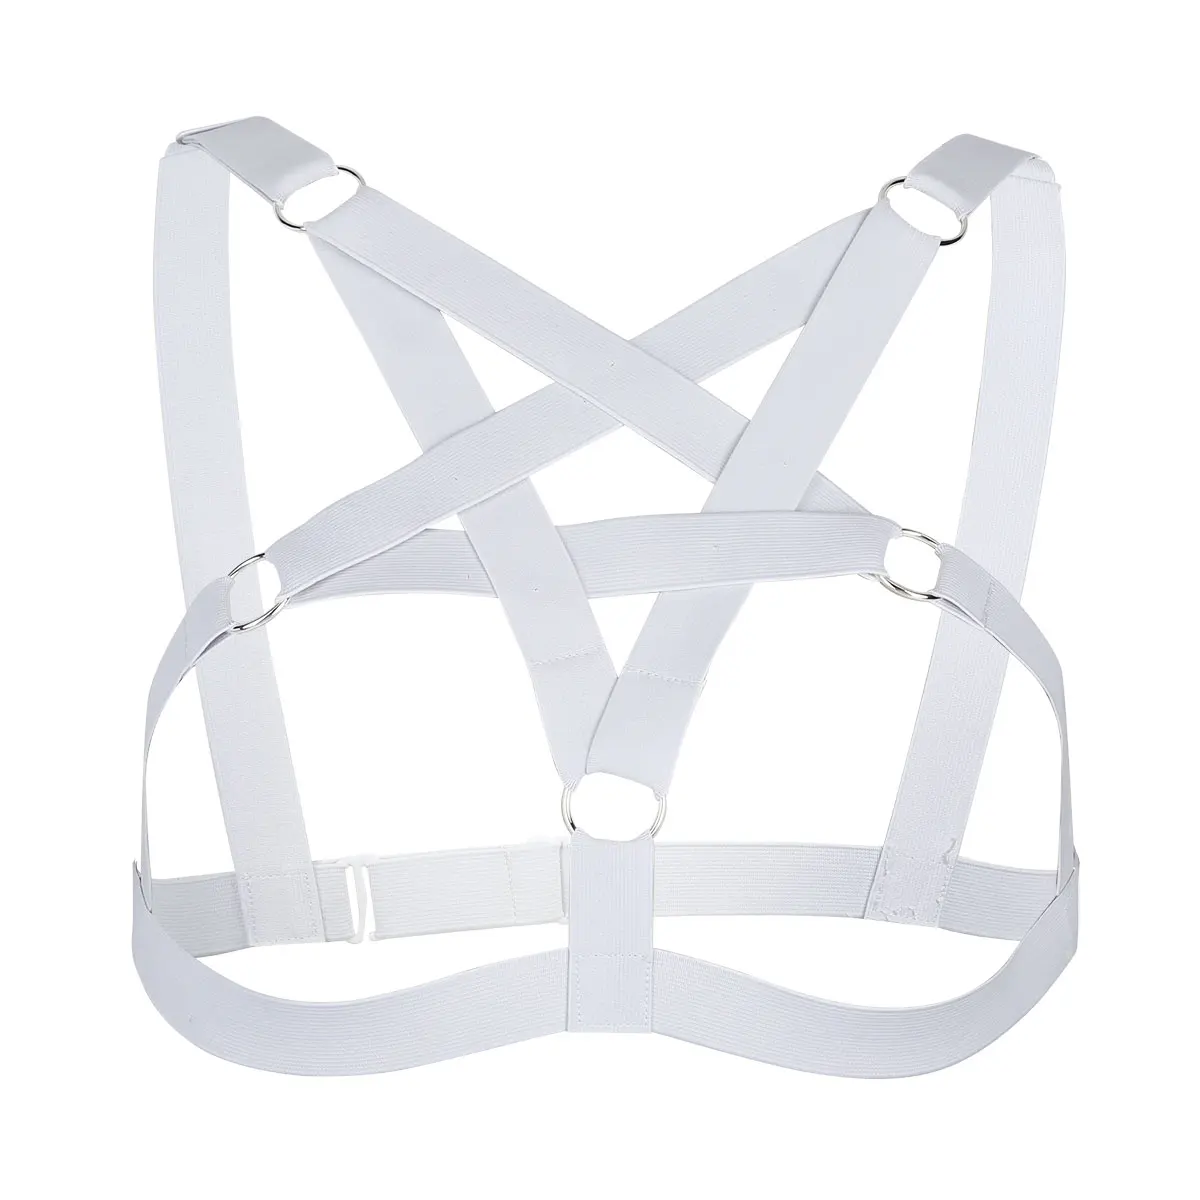 

Women Harness Bra Top Upper Body Chest Harness Belt Criss Cross Lingerie Elastic Strappy Hollow Out See Through Cupless Cage Bra